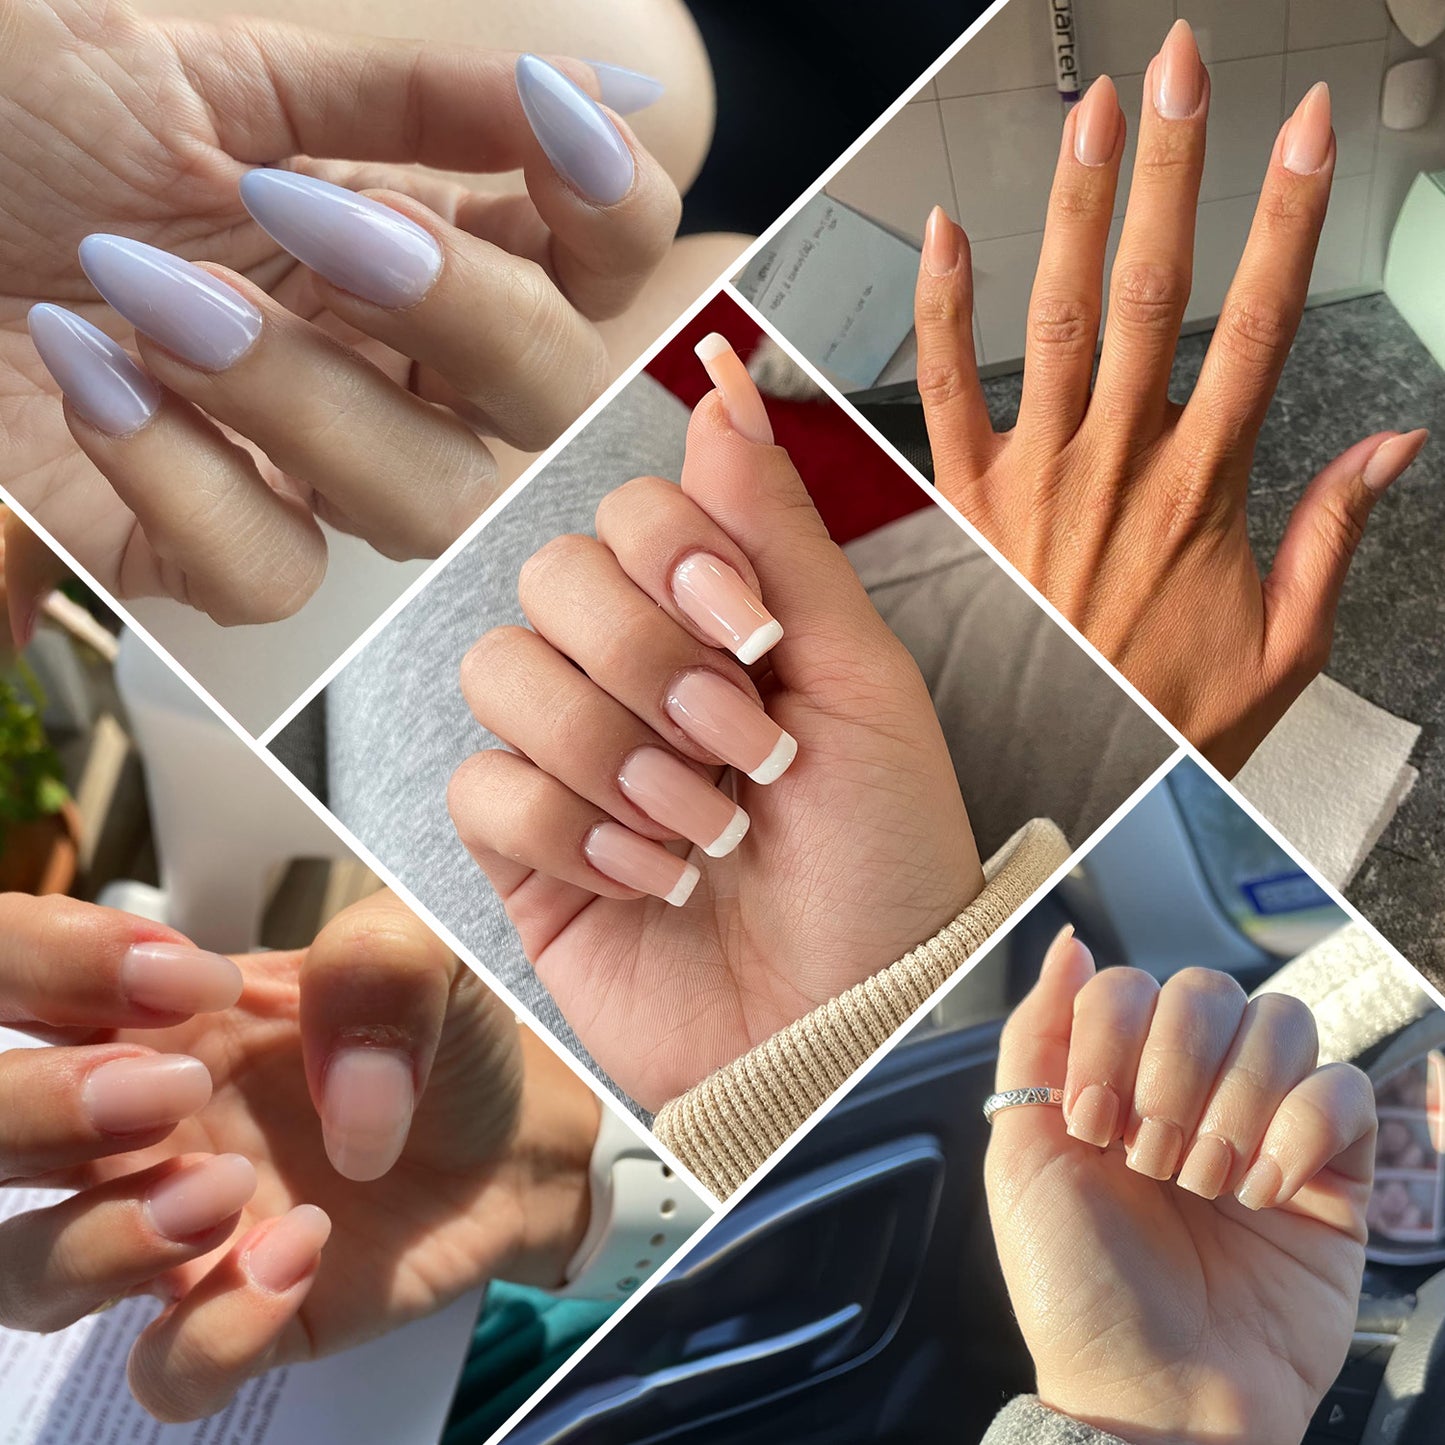 A collage of photos showing people's nails after using Polygel Intermediate Kit. The nails look shiny and polished.